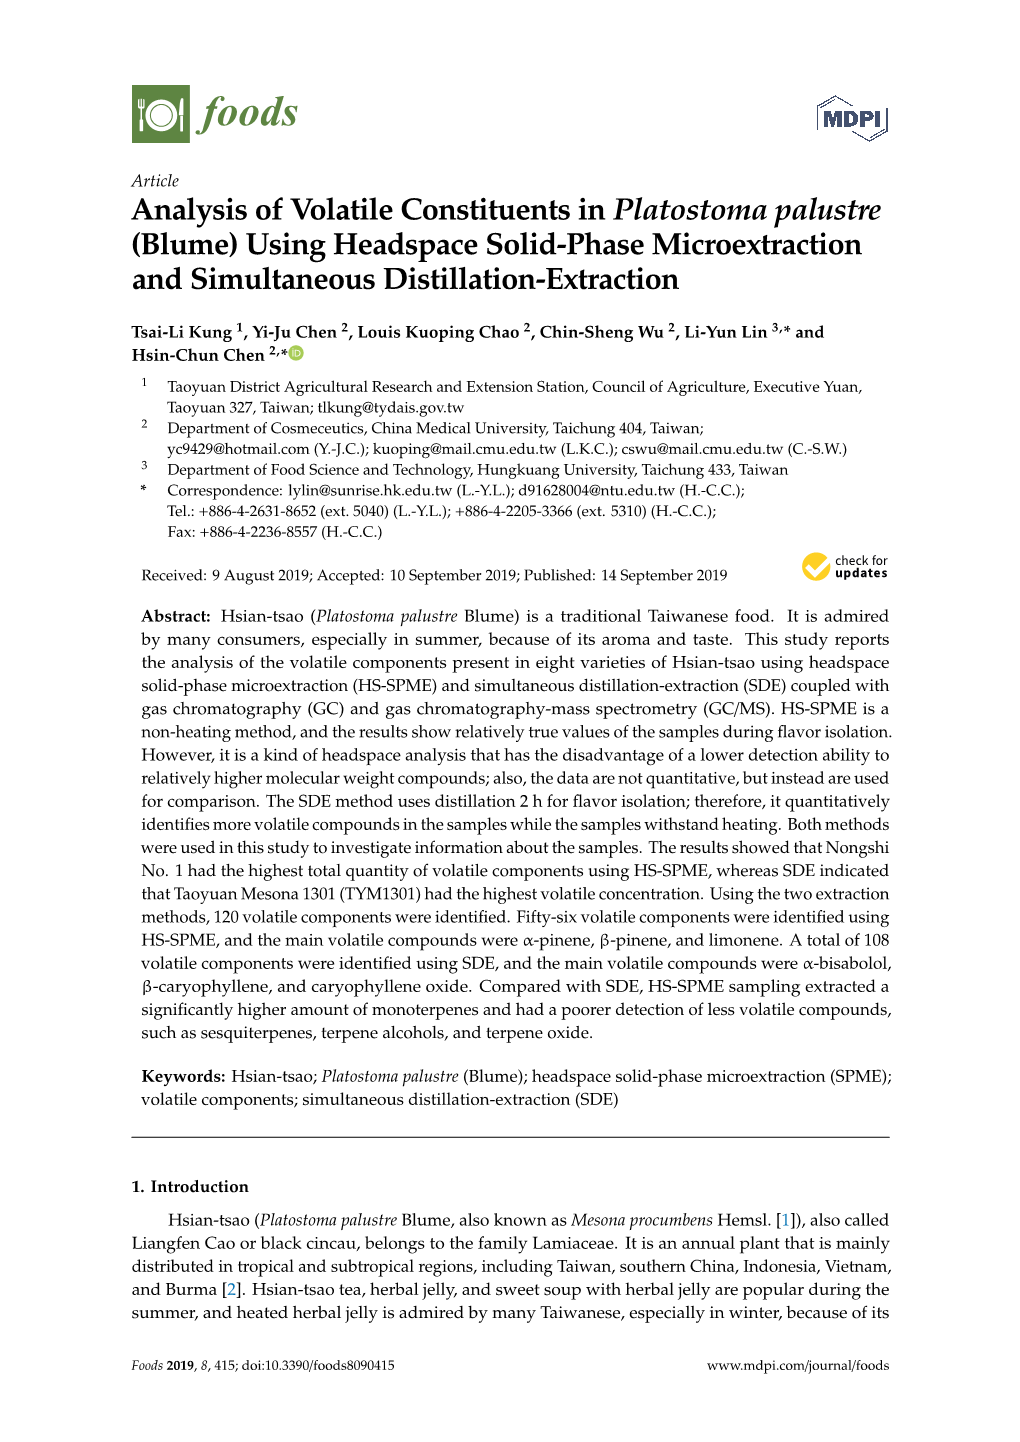 Analysis of Volatile Constituents in Platostoma Palustre (Blume) Using Headspace Solid-Phase Microextraction and Simultaneous Distillation-Extraction